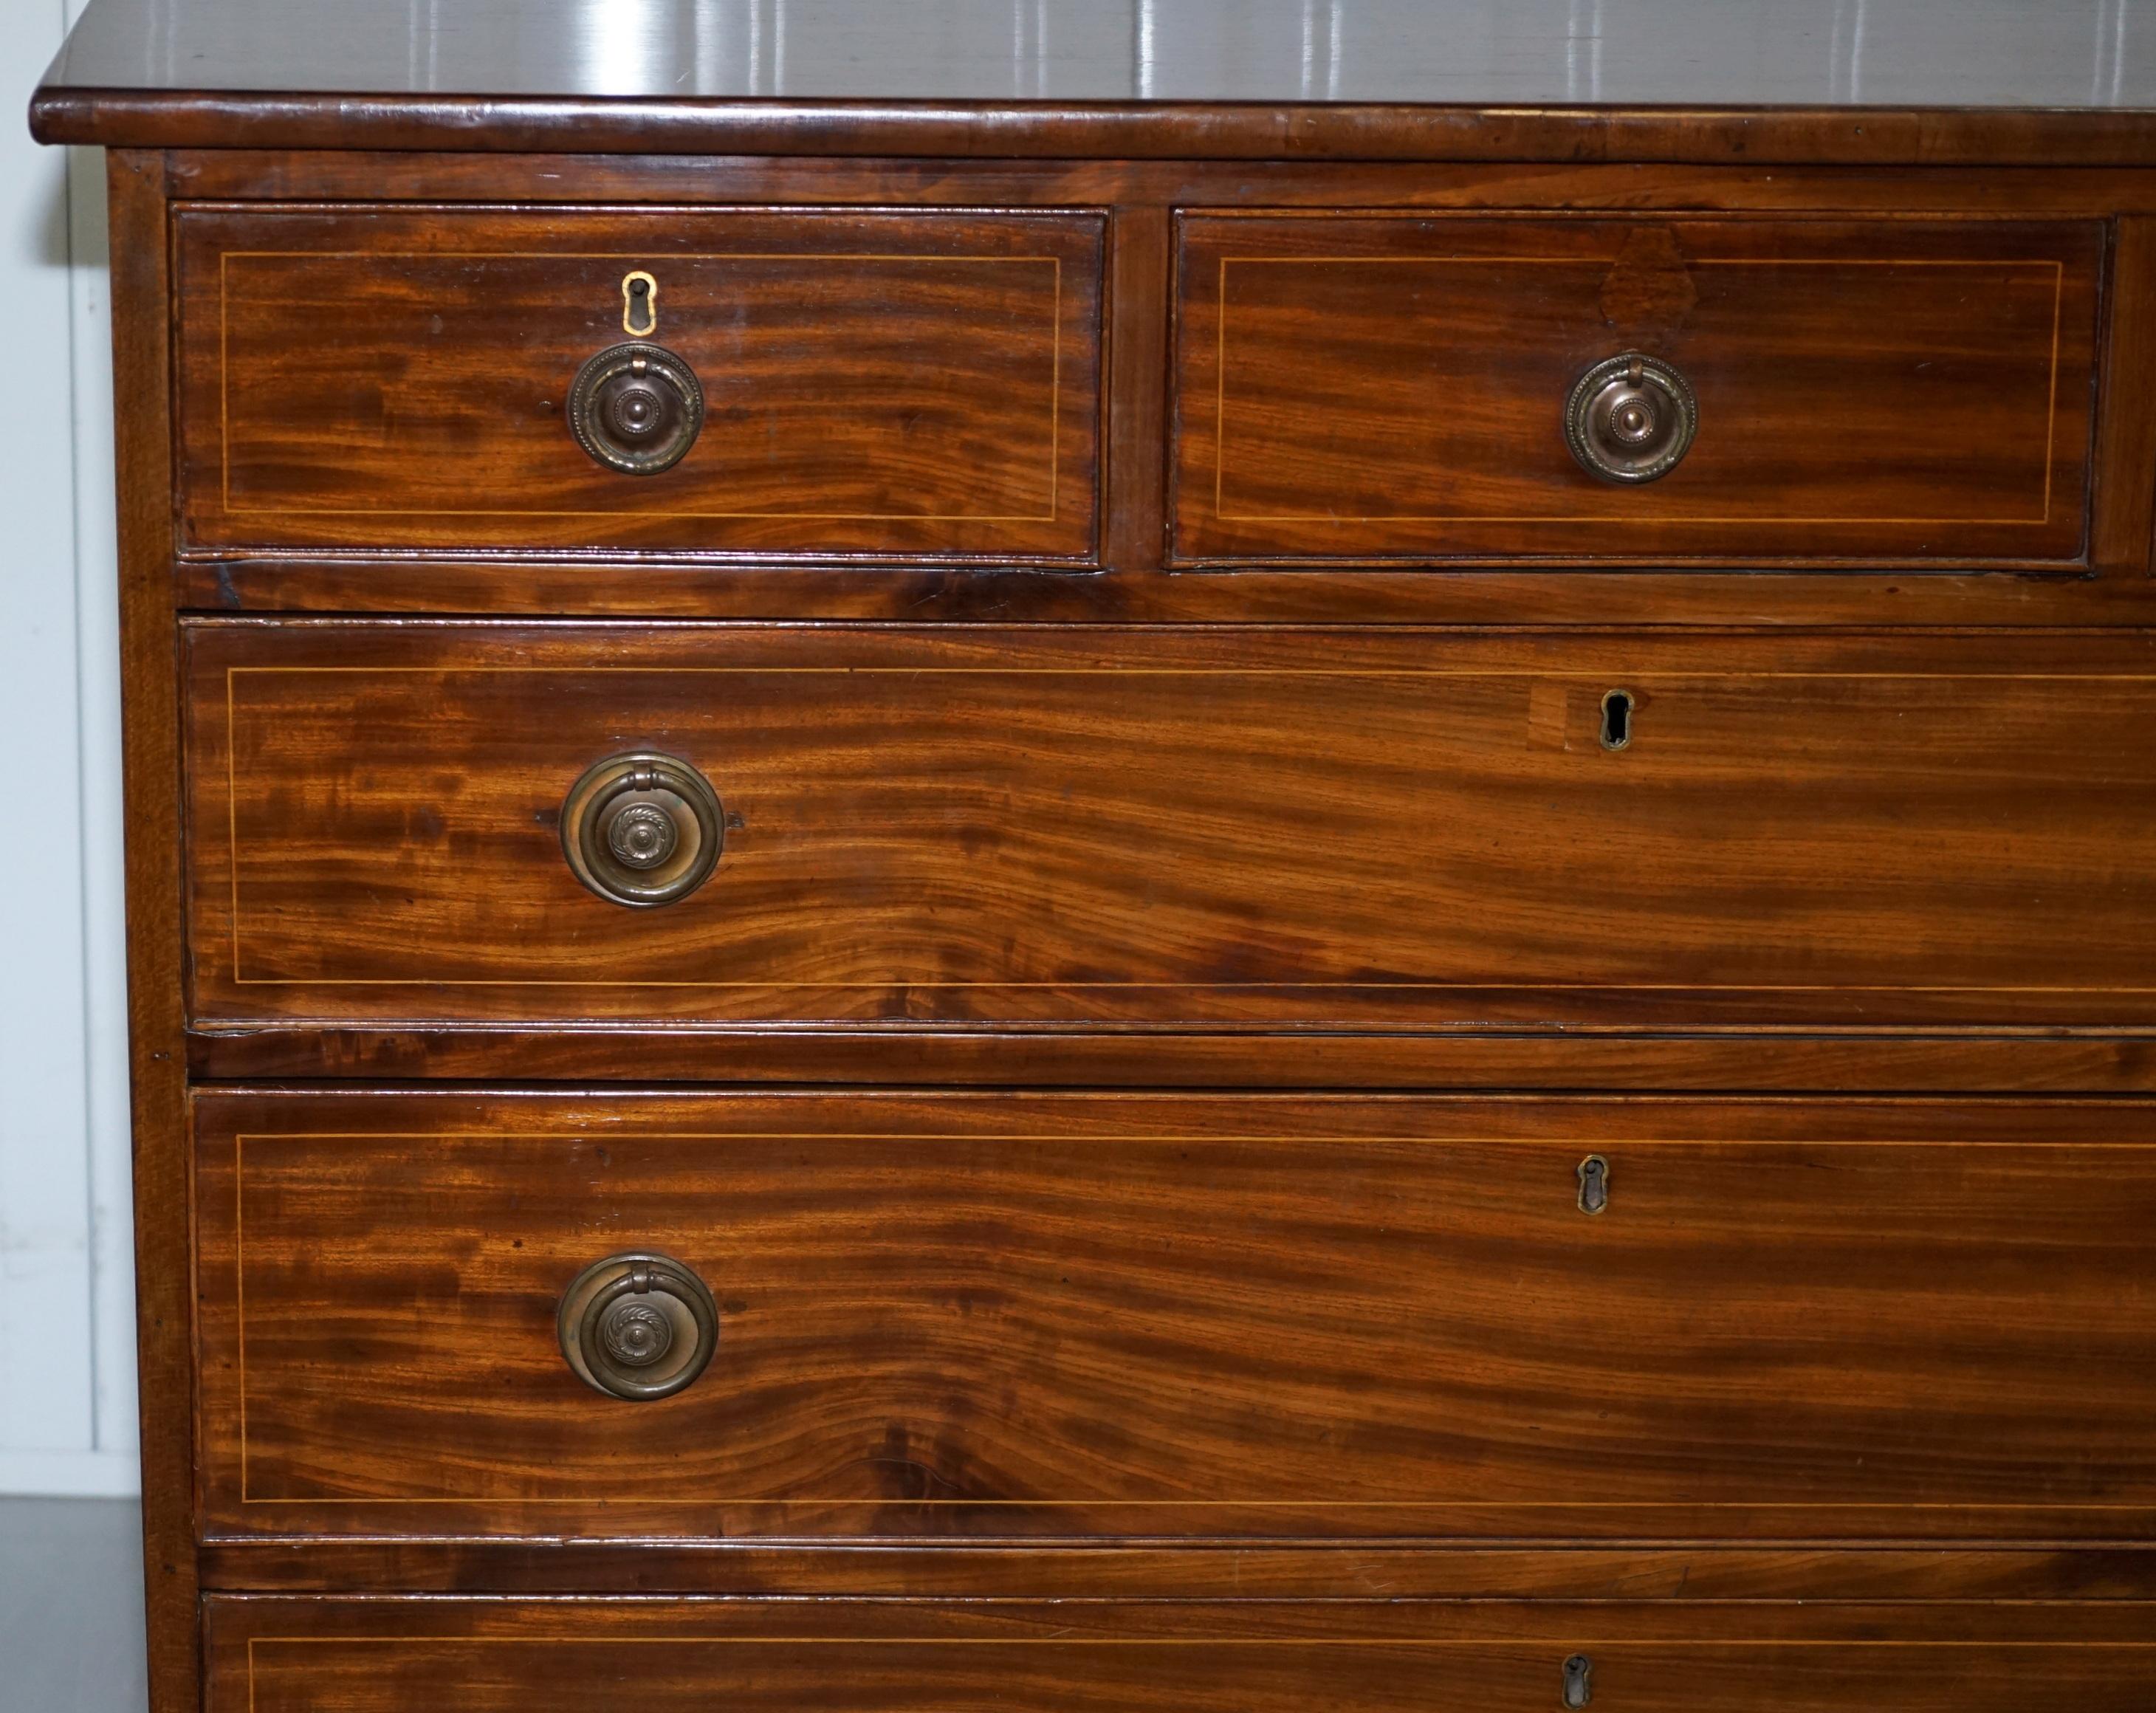 Lovely circa 1800 Georgian Hardwood Chest of Drawers Three over Three Formation 3